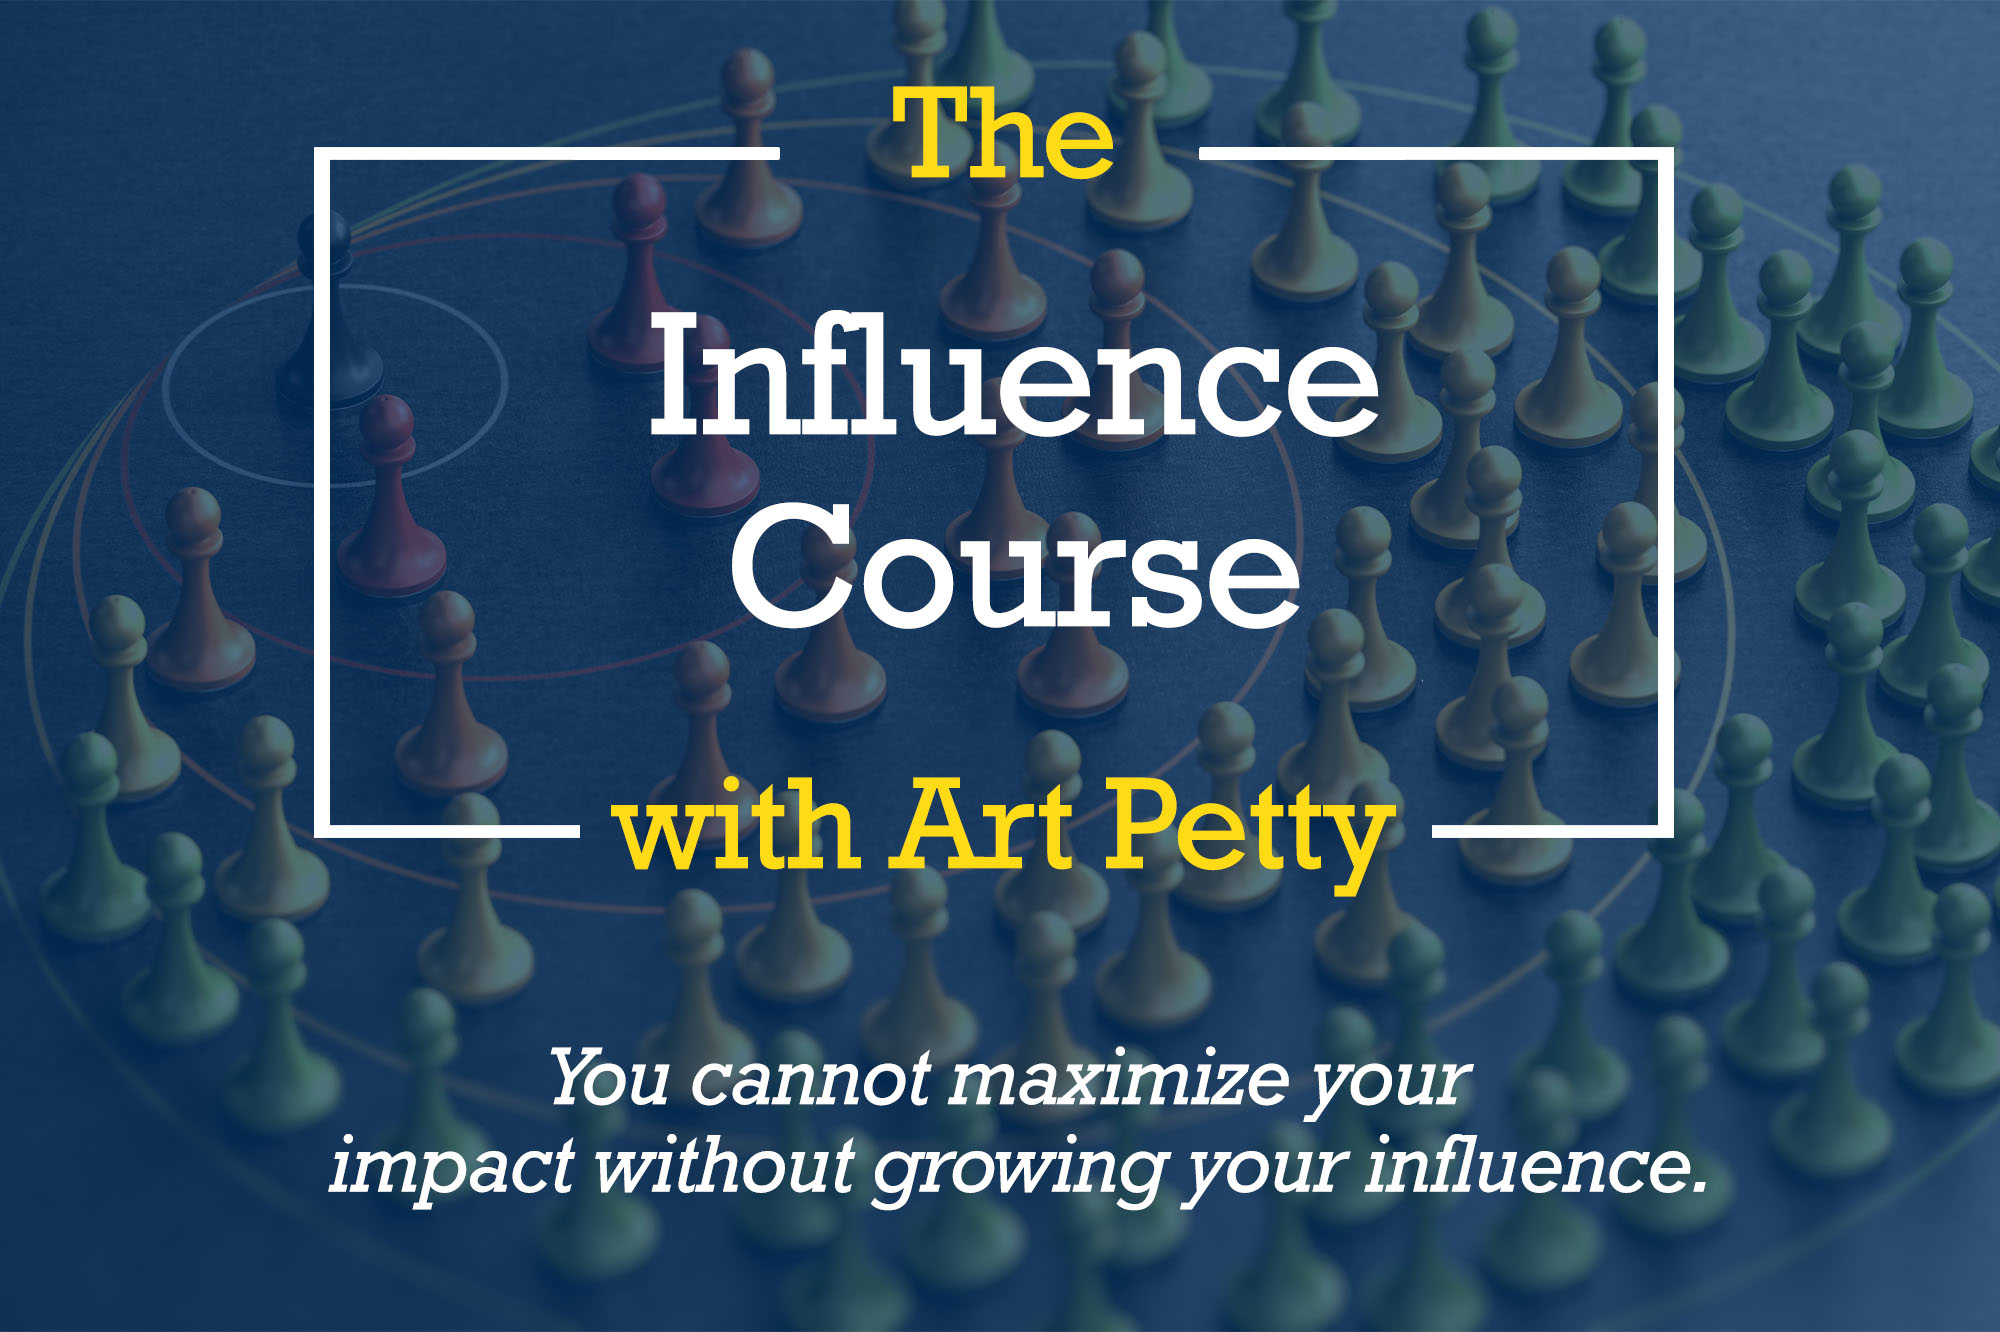 The influence course